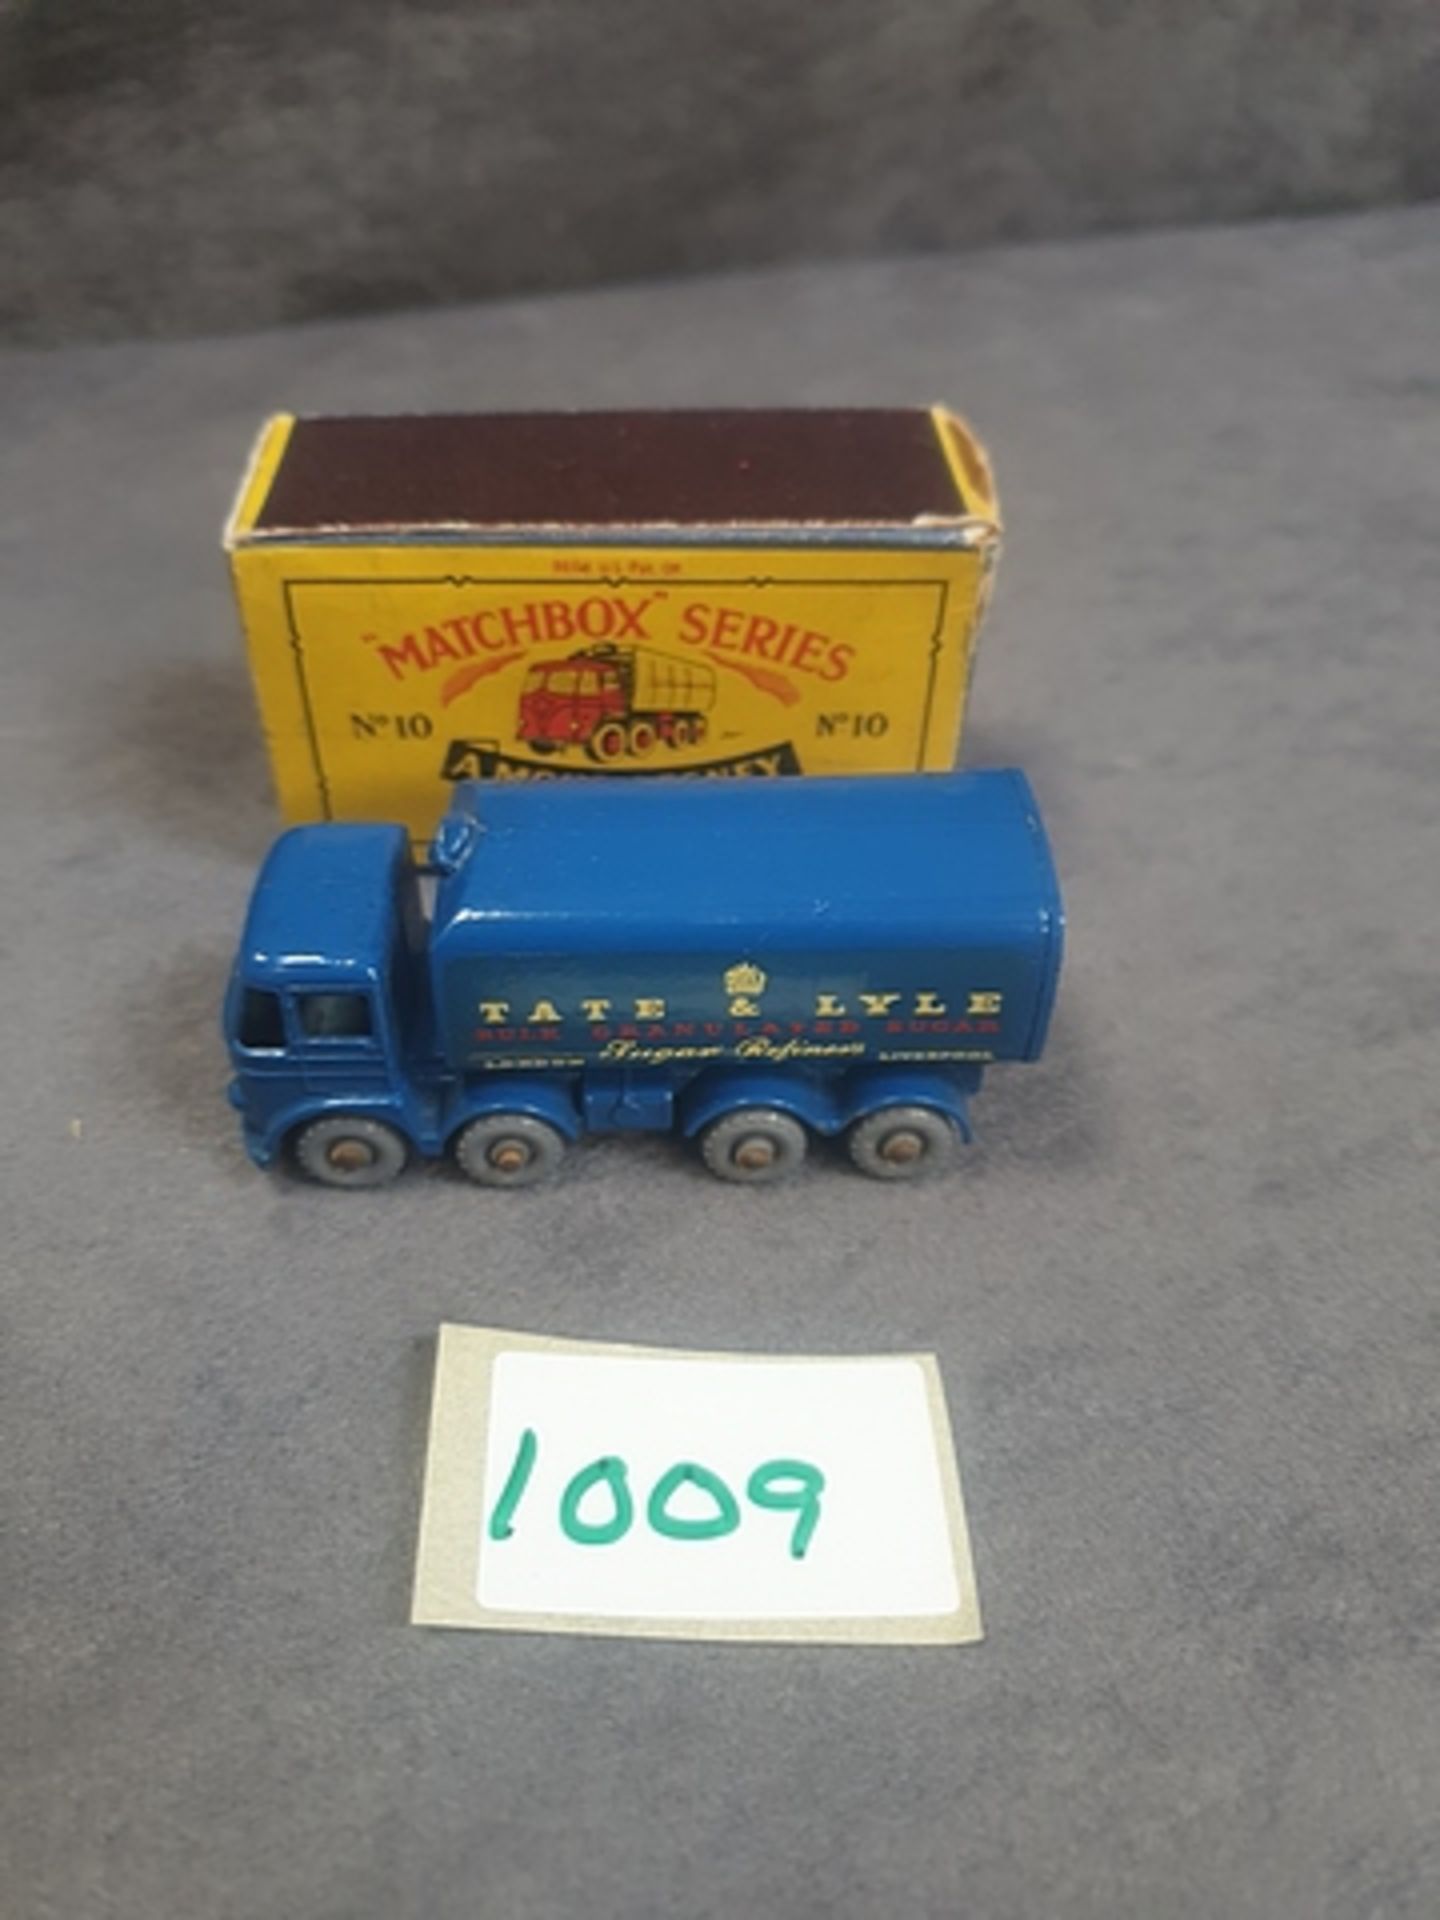 Matchbox Lesney Moko #10 Foden Sugar Container Completed With Box - Image 2 of 2